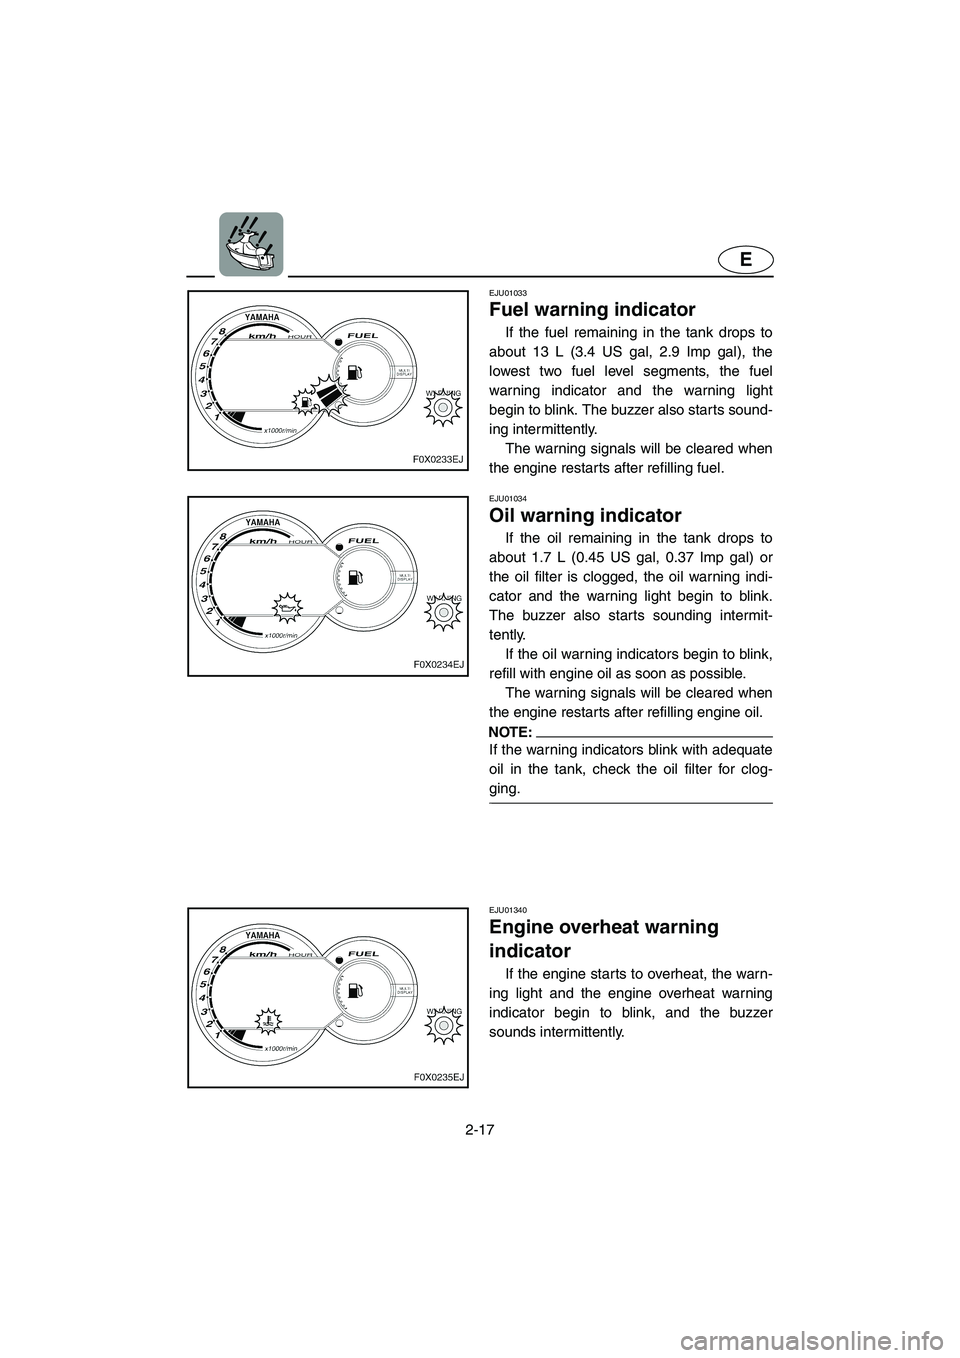 YAMAHA GP800R 2002 Service Manual 2-17
E
EJU01033 
Fuel warning indicator  
If the fuel remaining in the tank drops to
about 13 L (3.4 US gal, 2.9 Imp gal), the
lowest two fuel level segments, the fuel
warning indicator and the warnin